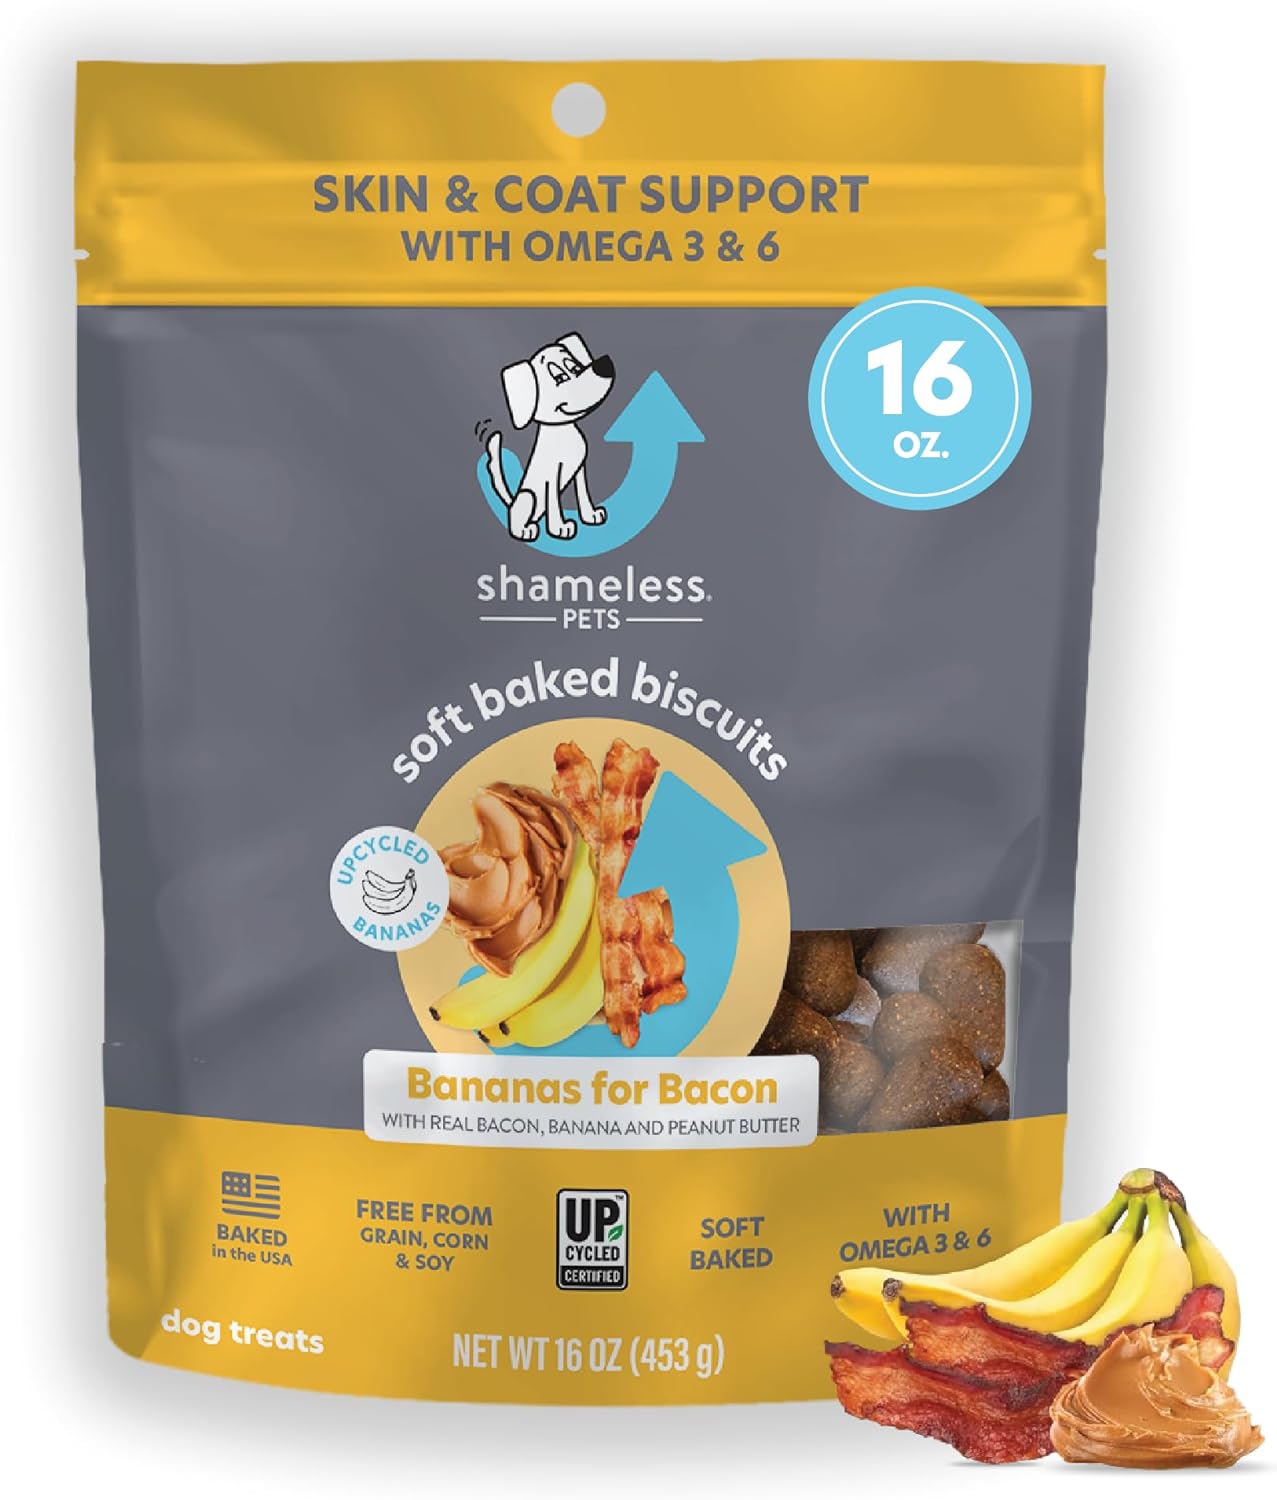 Shameless Pets Soft-Baked Dog Treats - Bananas for Bacon, Grain-Free Dog Snacks for Medium & Large Dogs, Natural & Healthy Dog Chews with Omega 3 & 6, Doggy Treats for Older & Senior Dogs, Made in USA